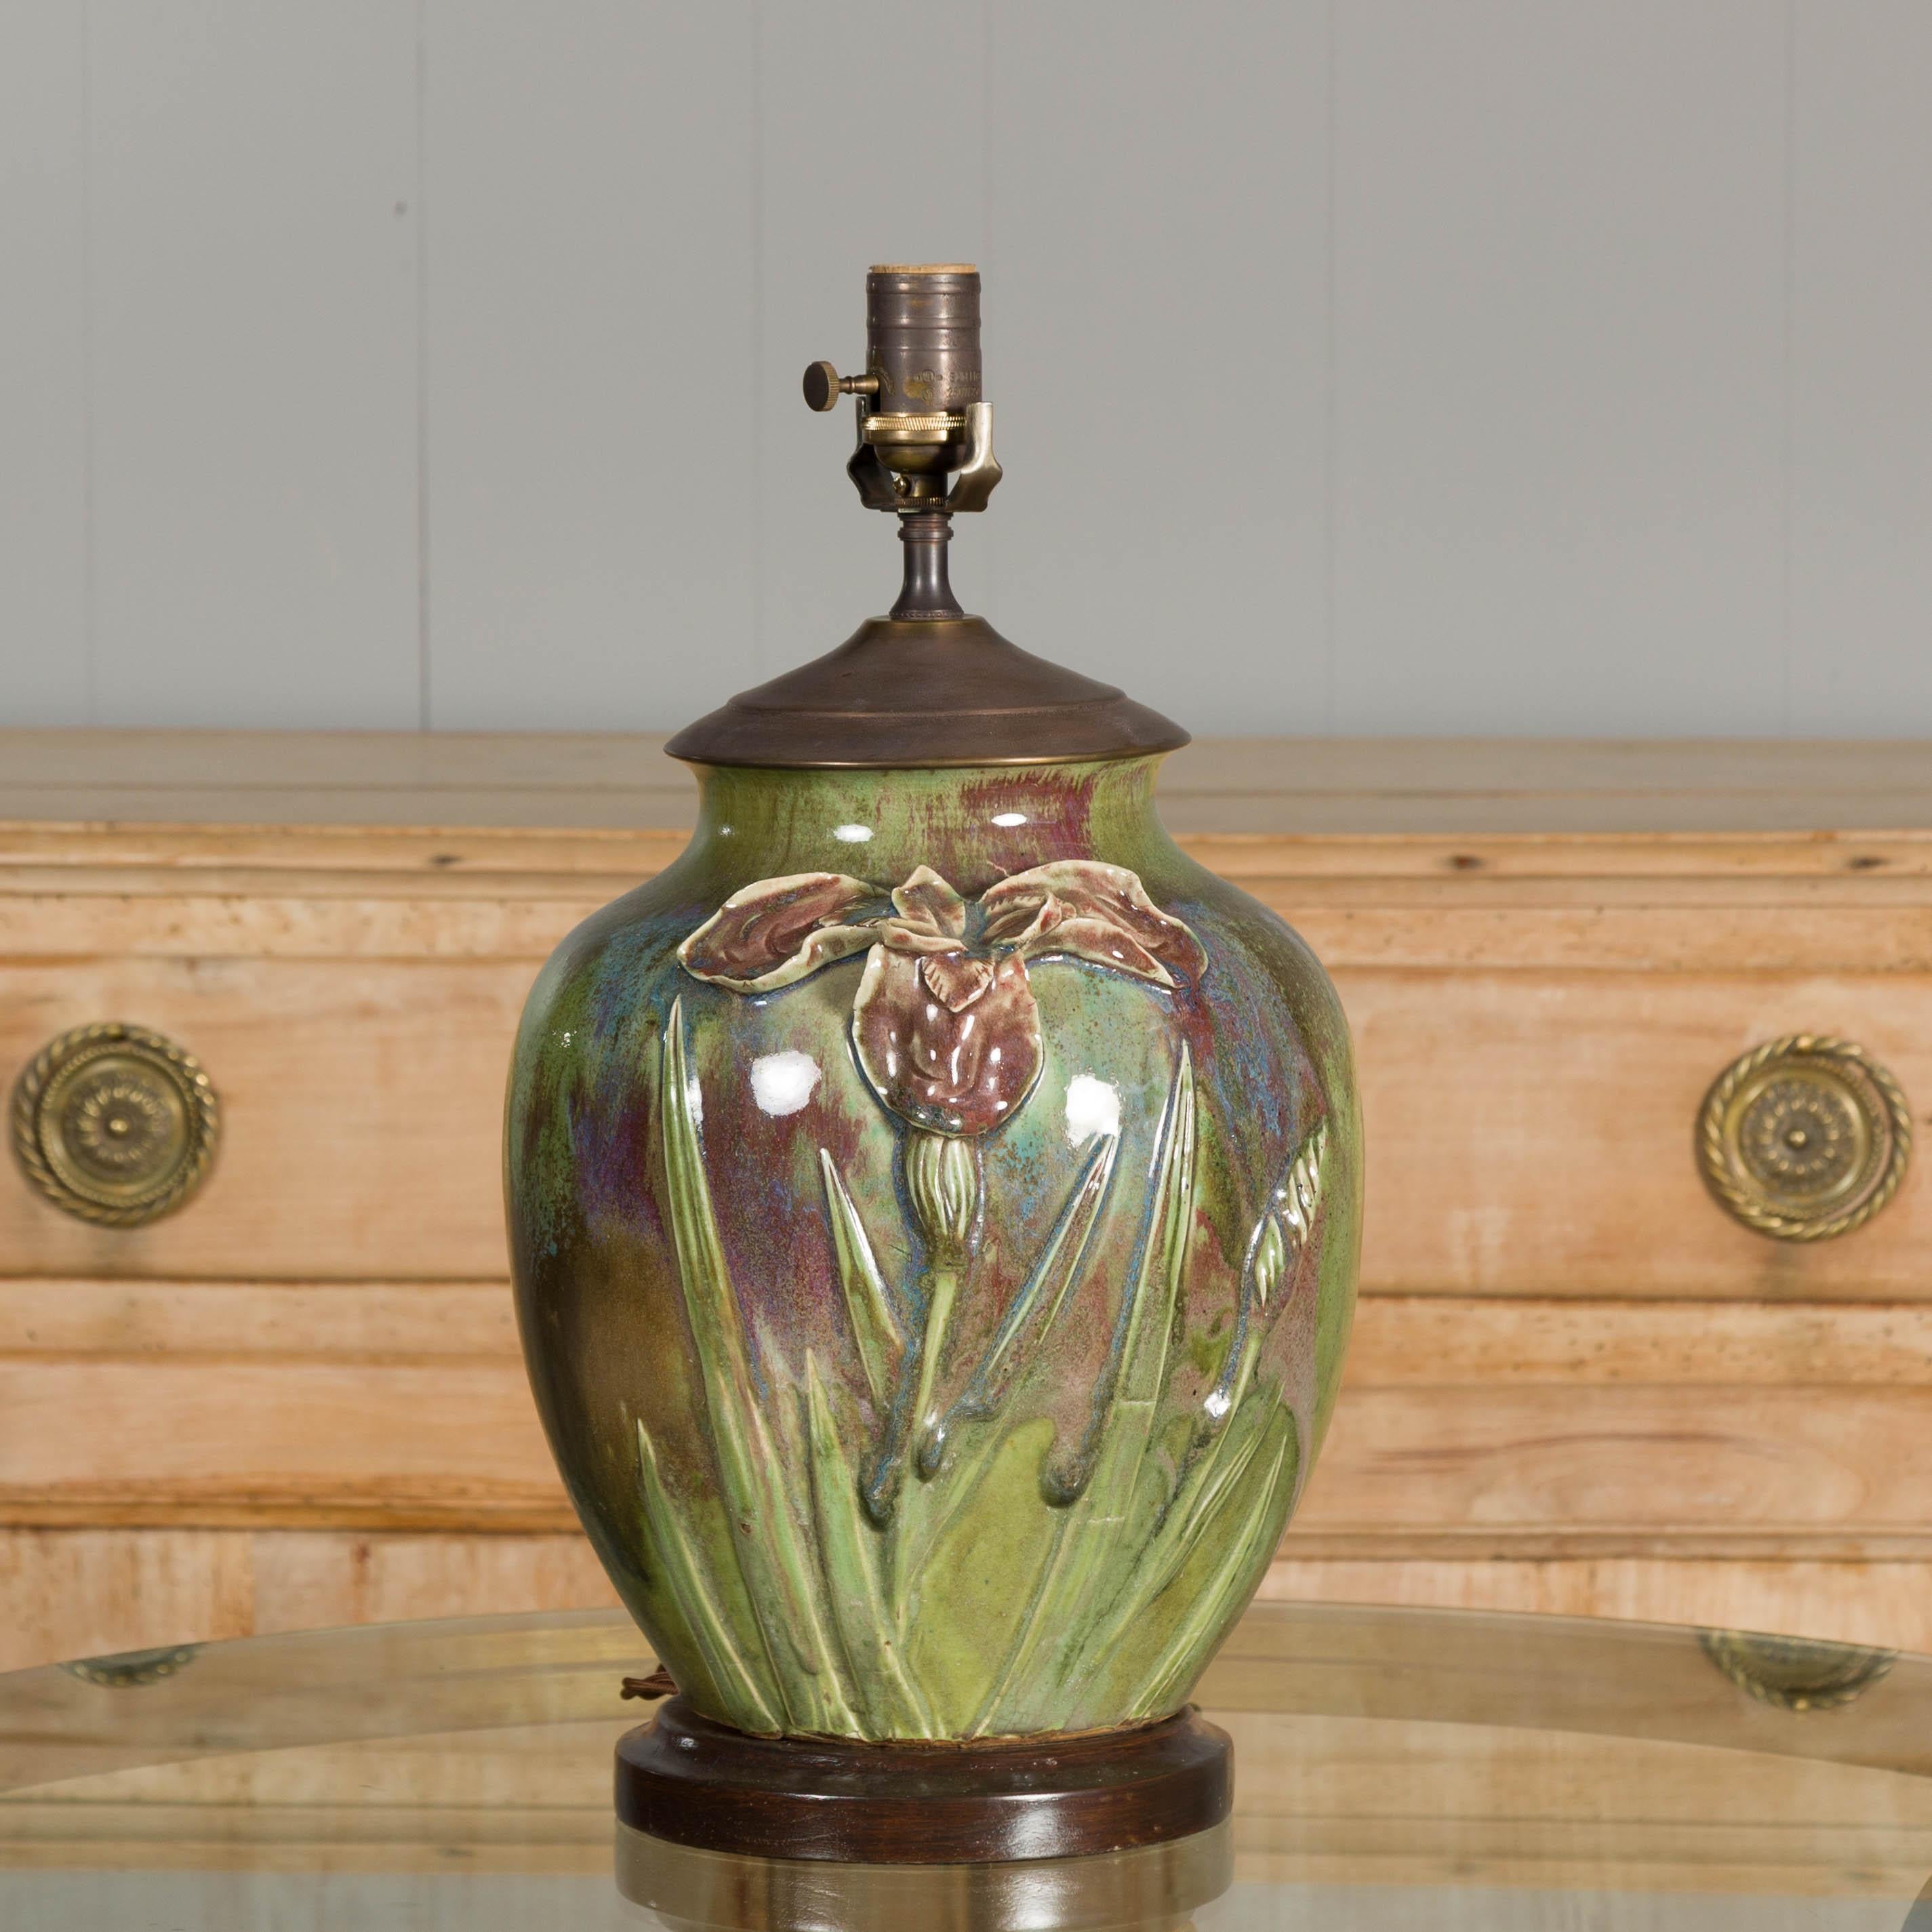 1920s Green Pottery Table Lamp with Raised Floral Motif on Wooden Base, Wired In Good Condition For Sale In Atlanta, GA